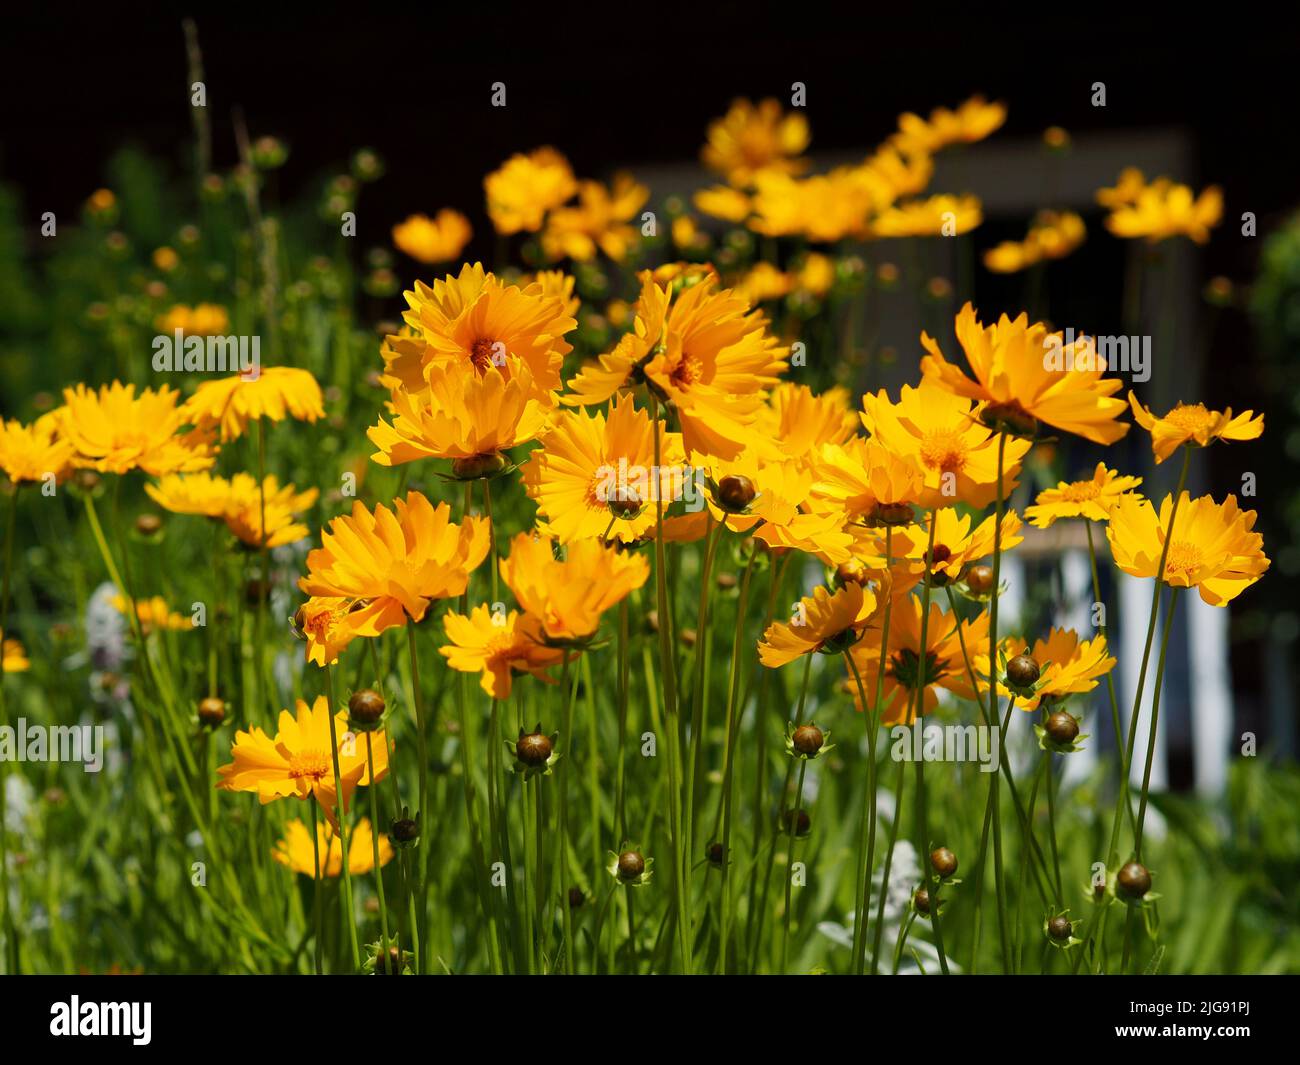 A clump of golden yellow tickseed (Coreopsis grandiflora) flowers in bloom in a garden in Ottawa, Ontario, Canada. Stock Photo